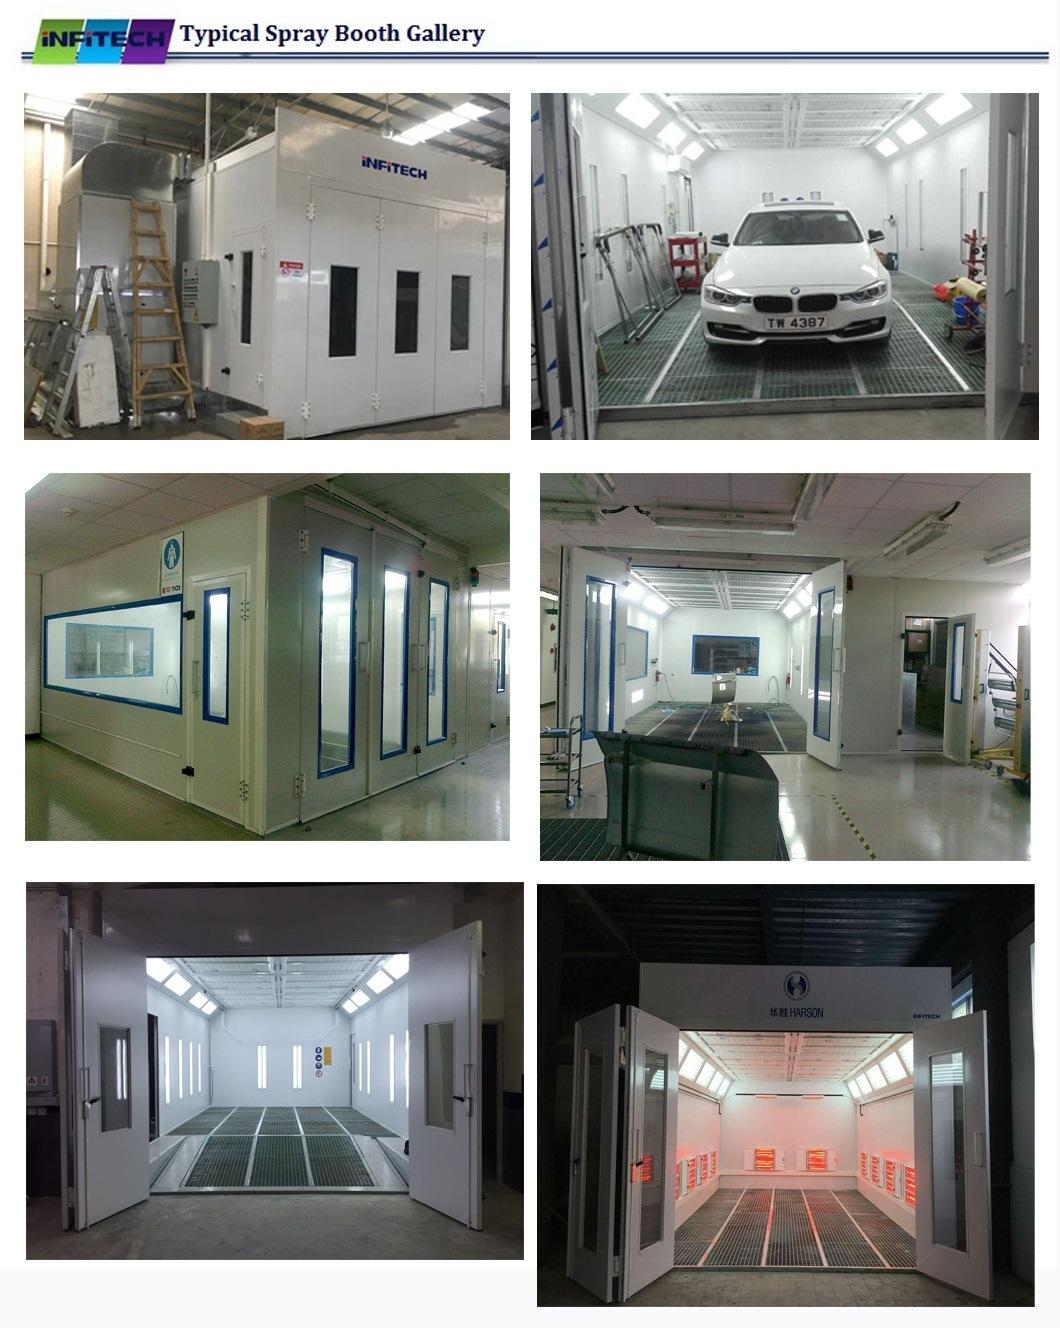 EU Standard Spraying Chamber Used for Vehicle Painting Equipment